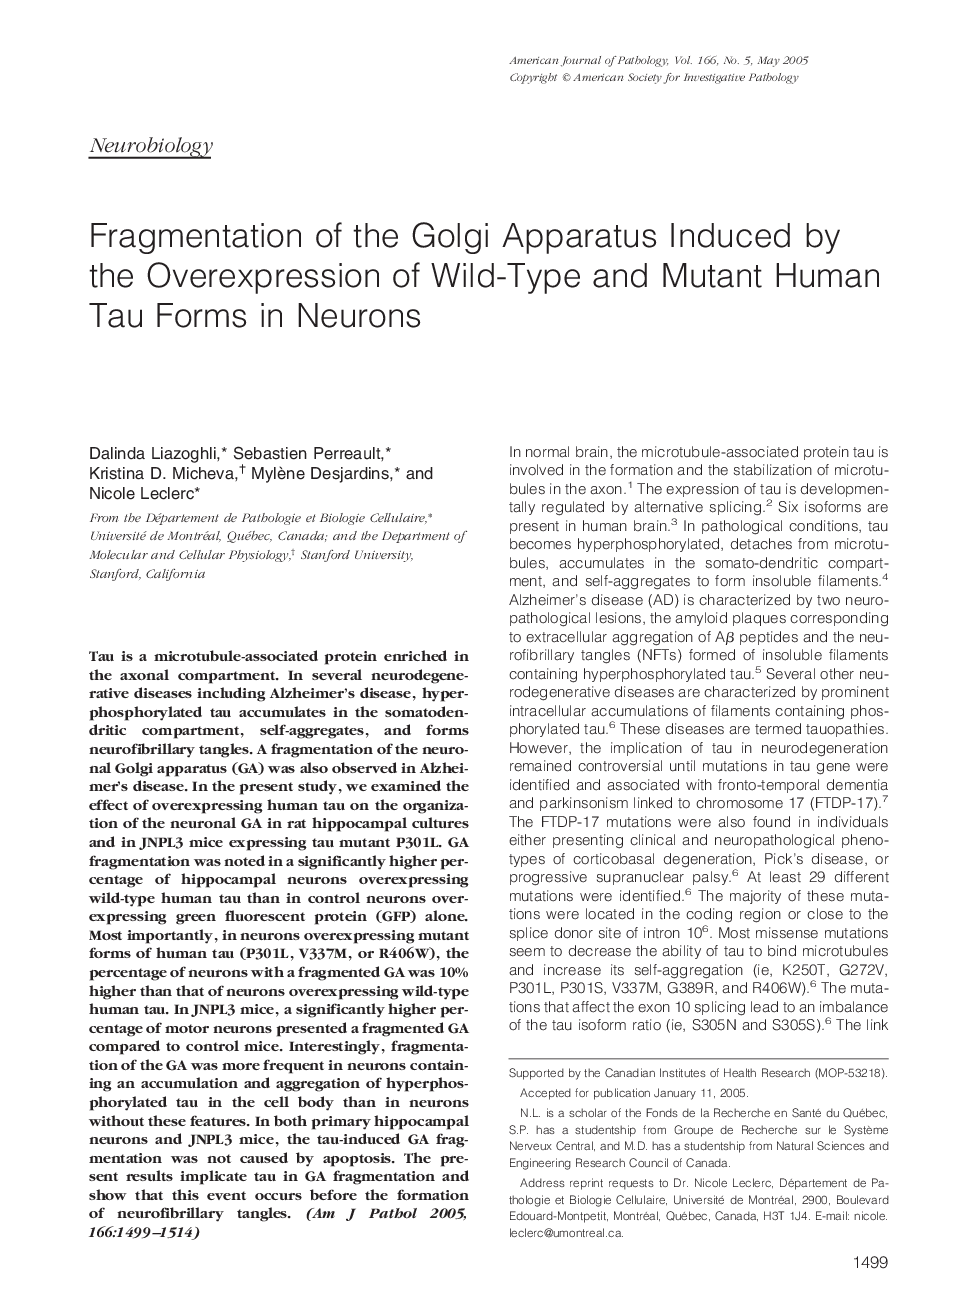 Fragmentation of the Golgi Apparatus Induced by the Overexpression of Wild-Type and Mutant Human Tau Forms in Neurons